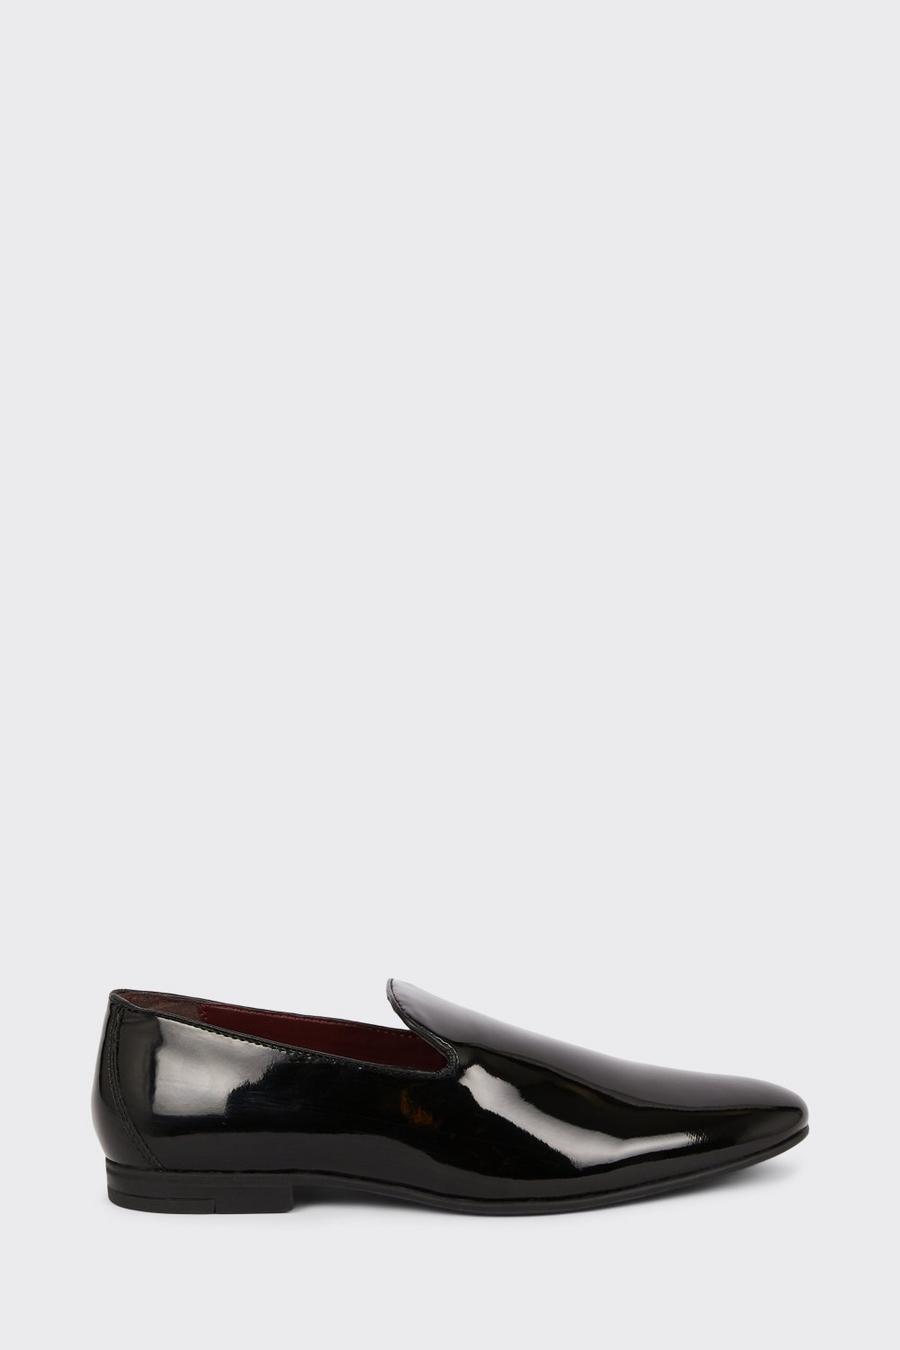 Smart Black Patent Loafers